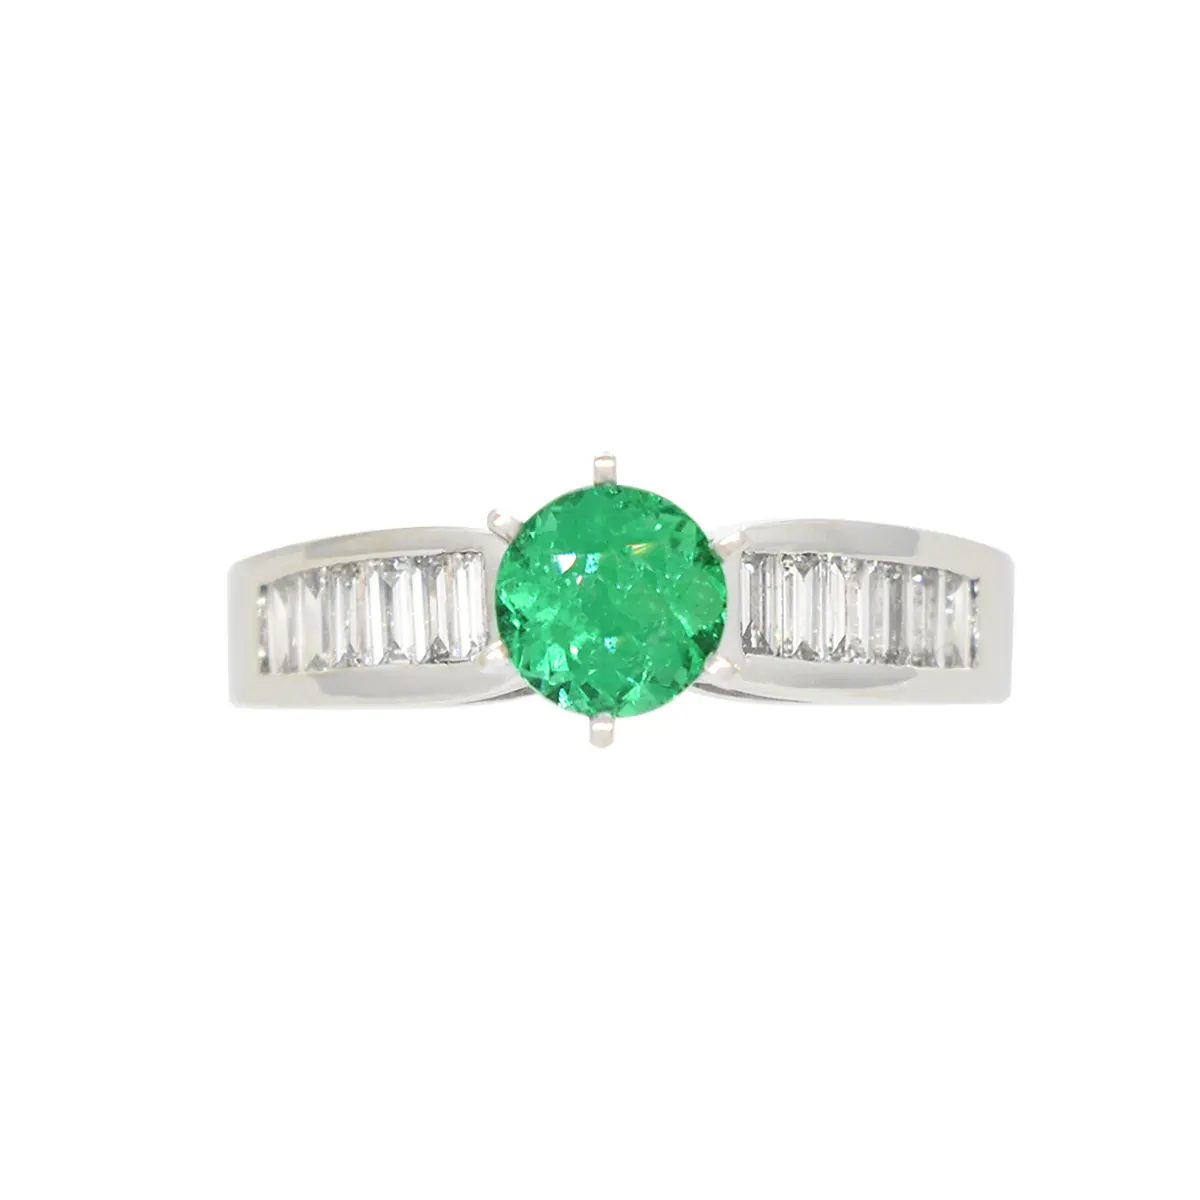 The emerald ring's centerpiece is a round-cut genuine emerald with a weight of 0.66 Ct. The emerald is carefully selected for its vibrant green color and clarity